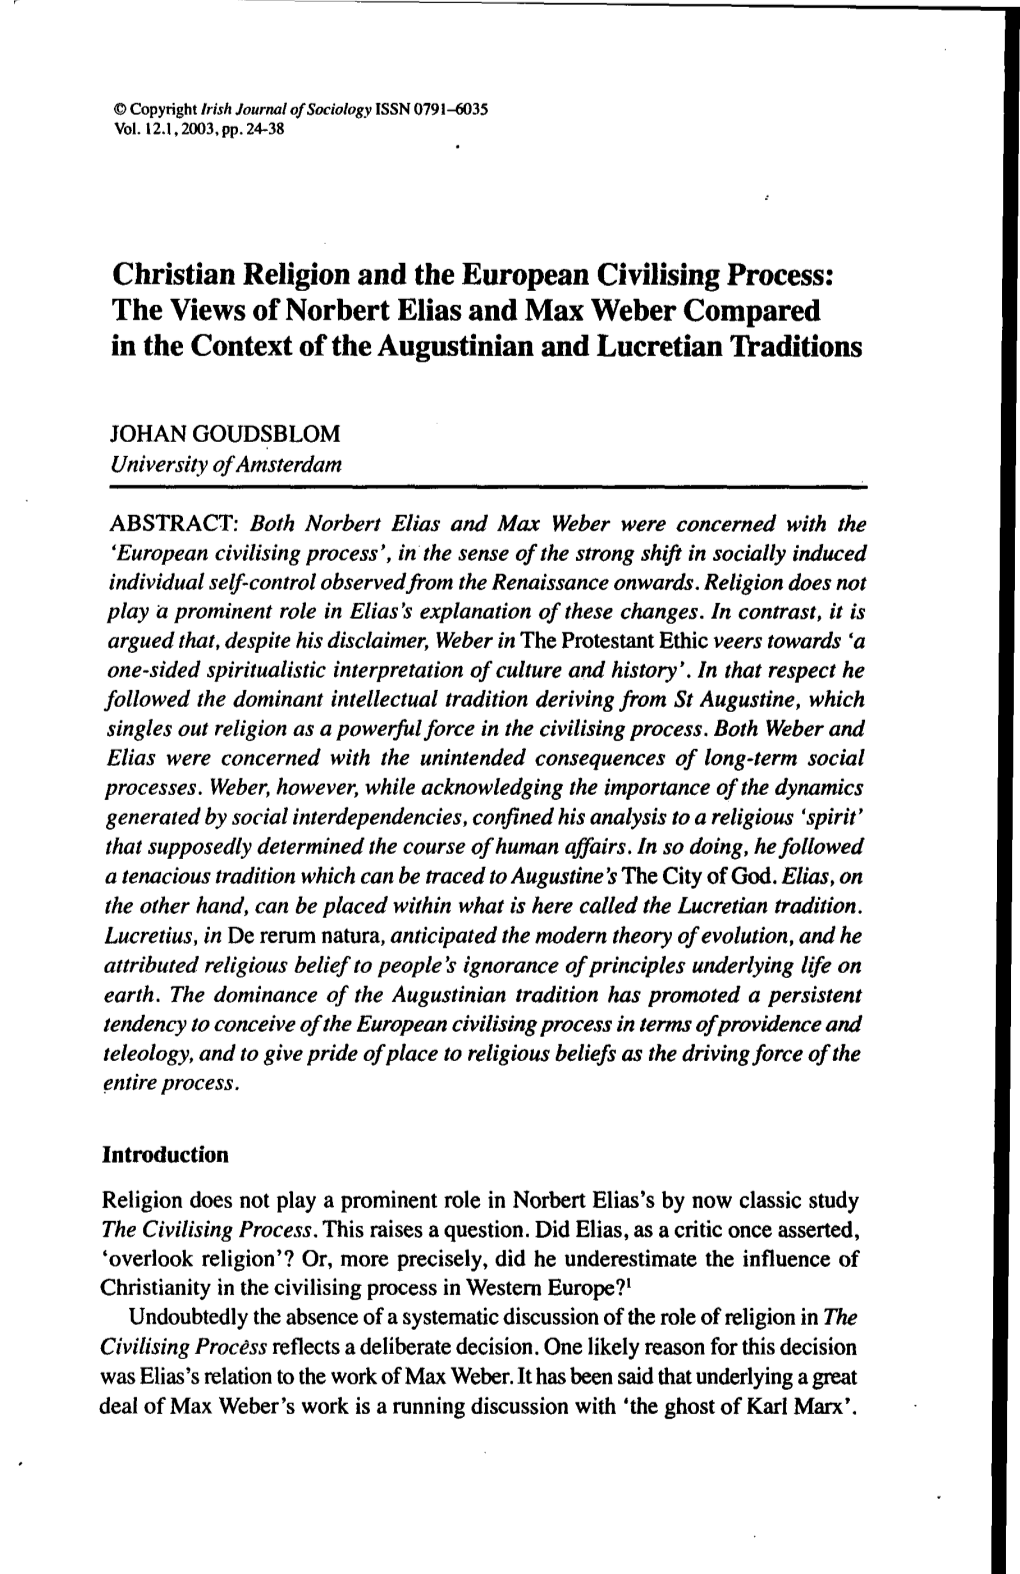 Christian Religion and the European Civilising Process: the Views of Norbert Elias and Max Weber Compared in the Context of the Augustinian and Lucretian Traditions